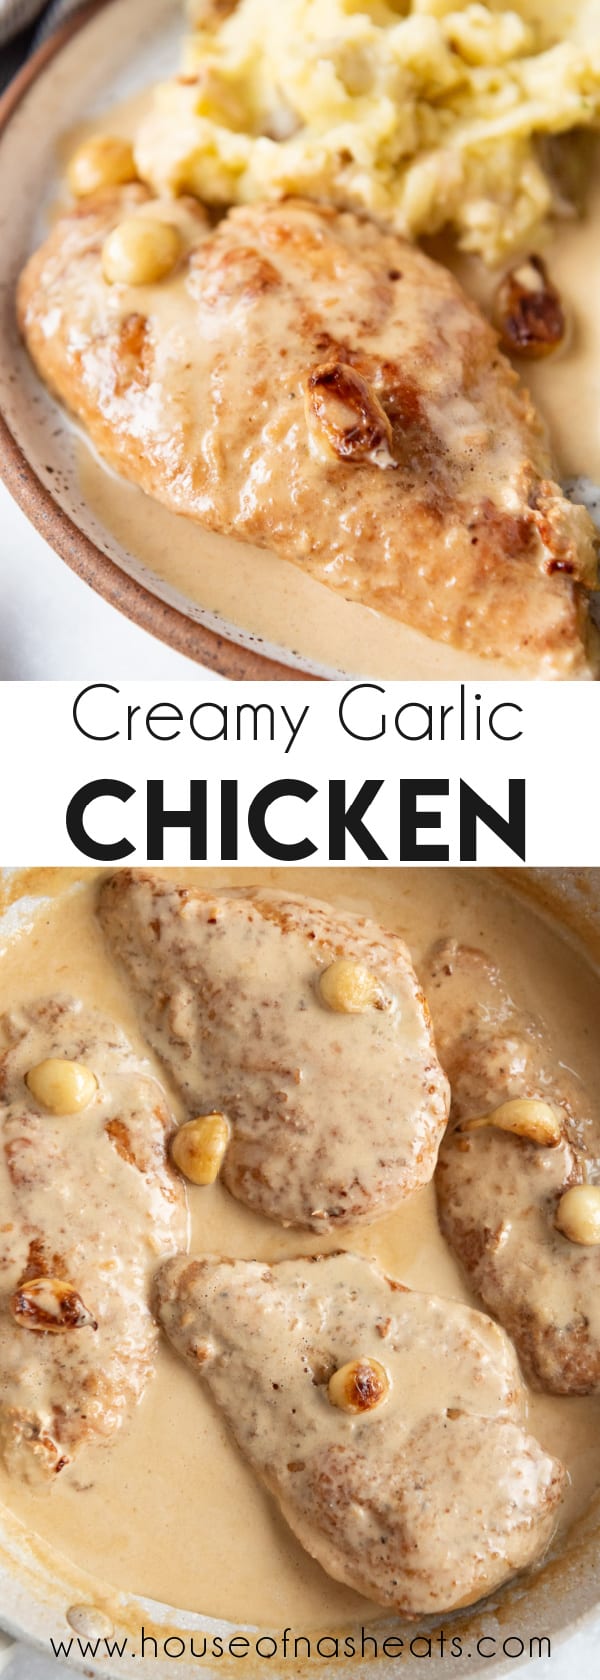 A collage of images of creamy garlic chicken with text overlay.